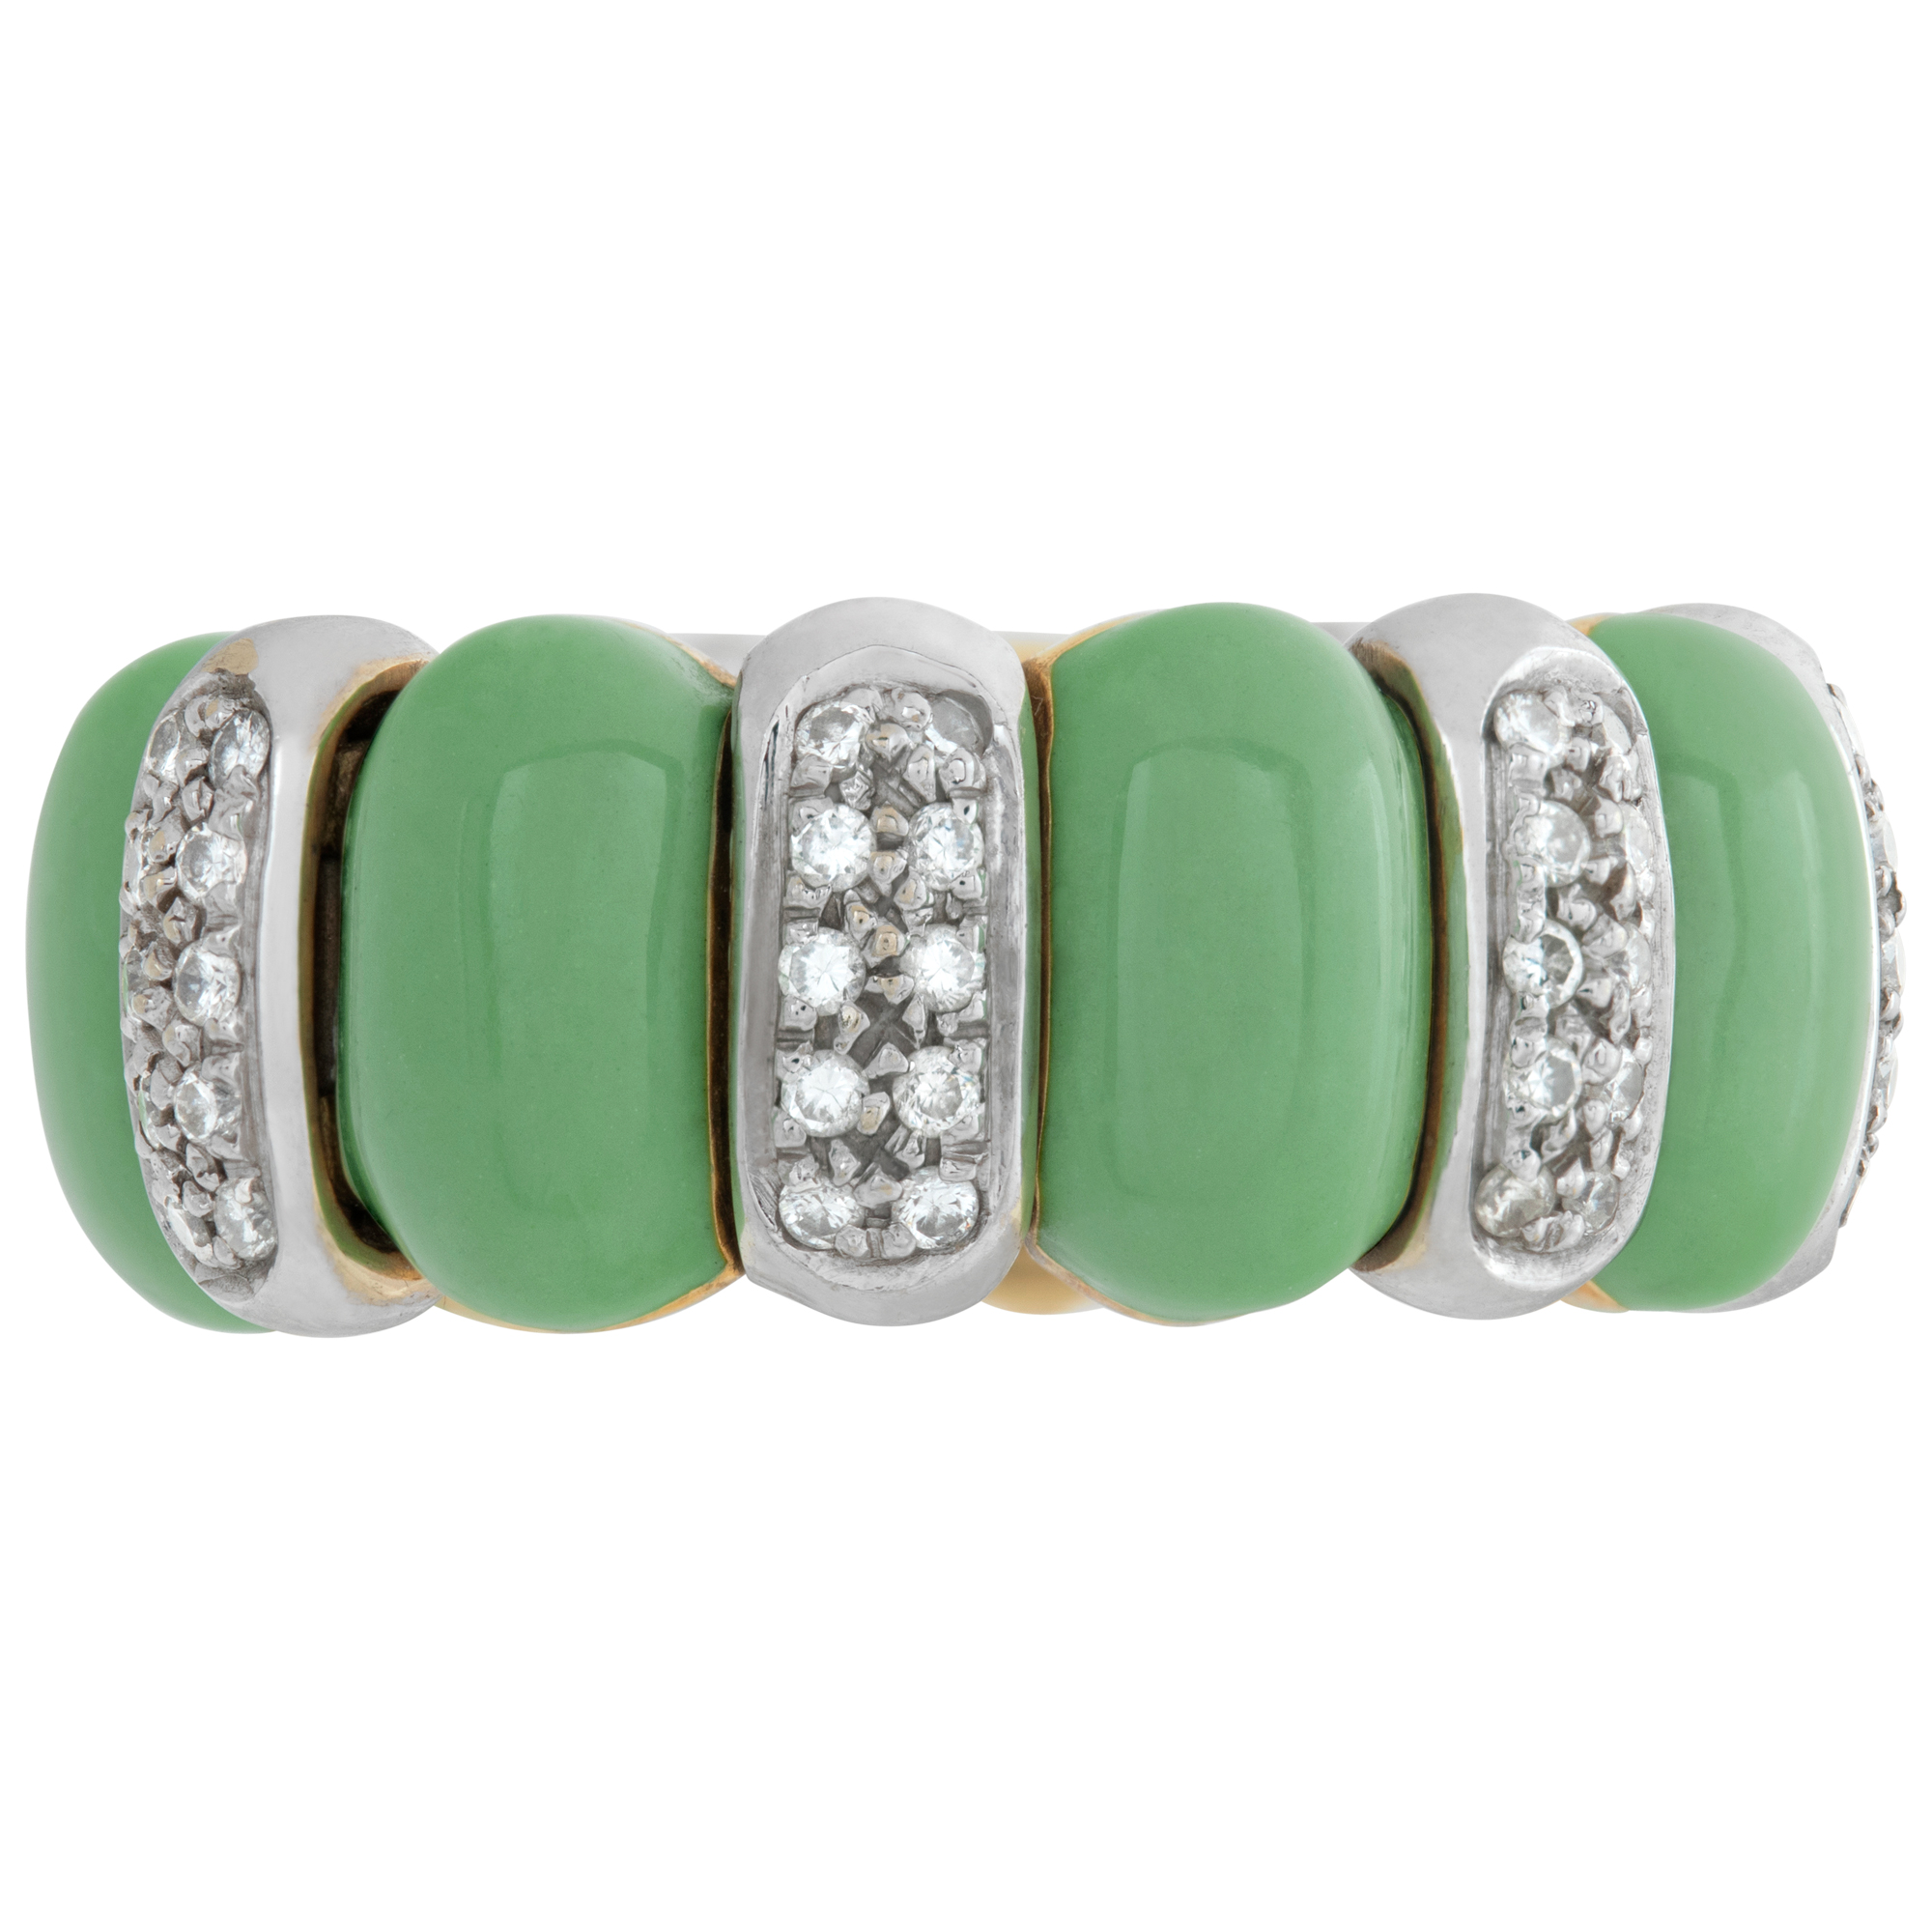 Designer signed "Valent" flexible eternity band with diamonds and cabochon green turquoise set in 18K white & yellow gold. image 2